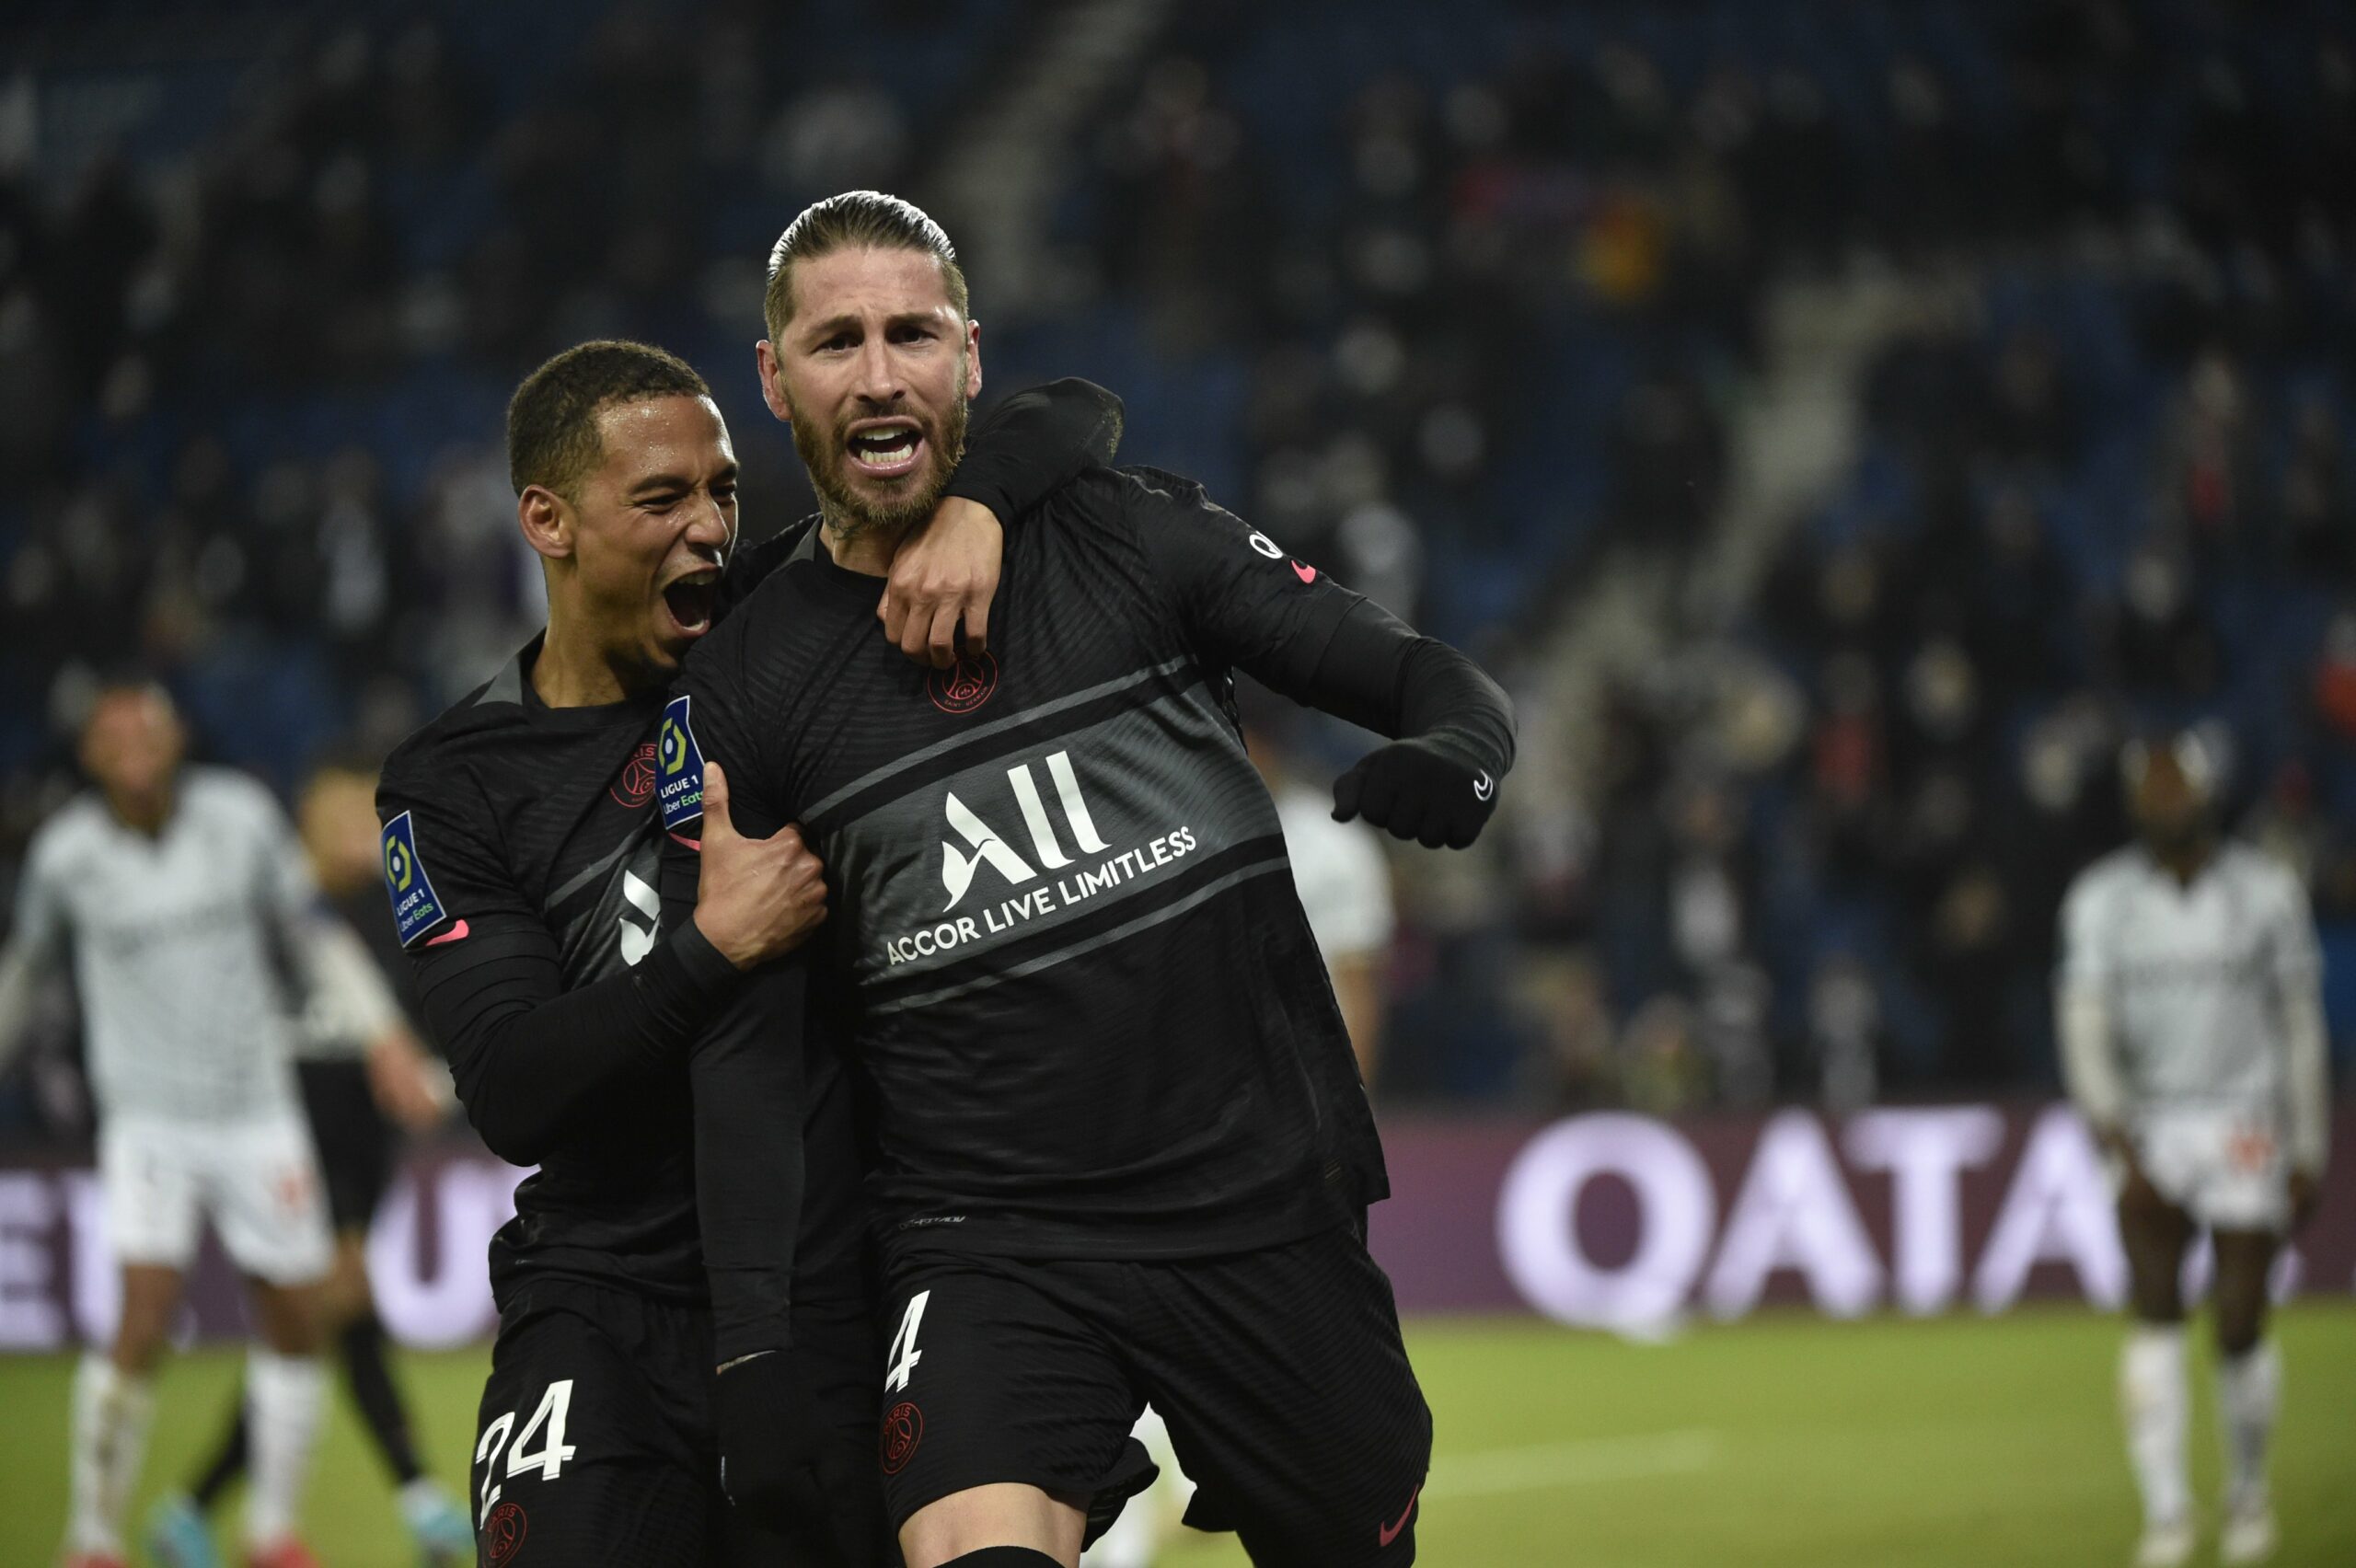 PSG beat Reims: Sergio Ramos nets his first PSG goal as they trash Reims 4-0 to go 11 points clear in the Ligue 1 table